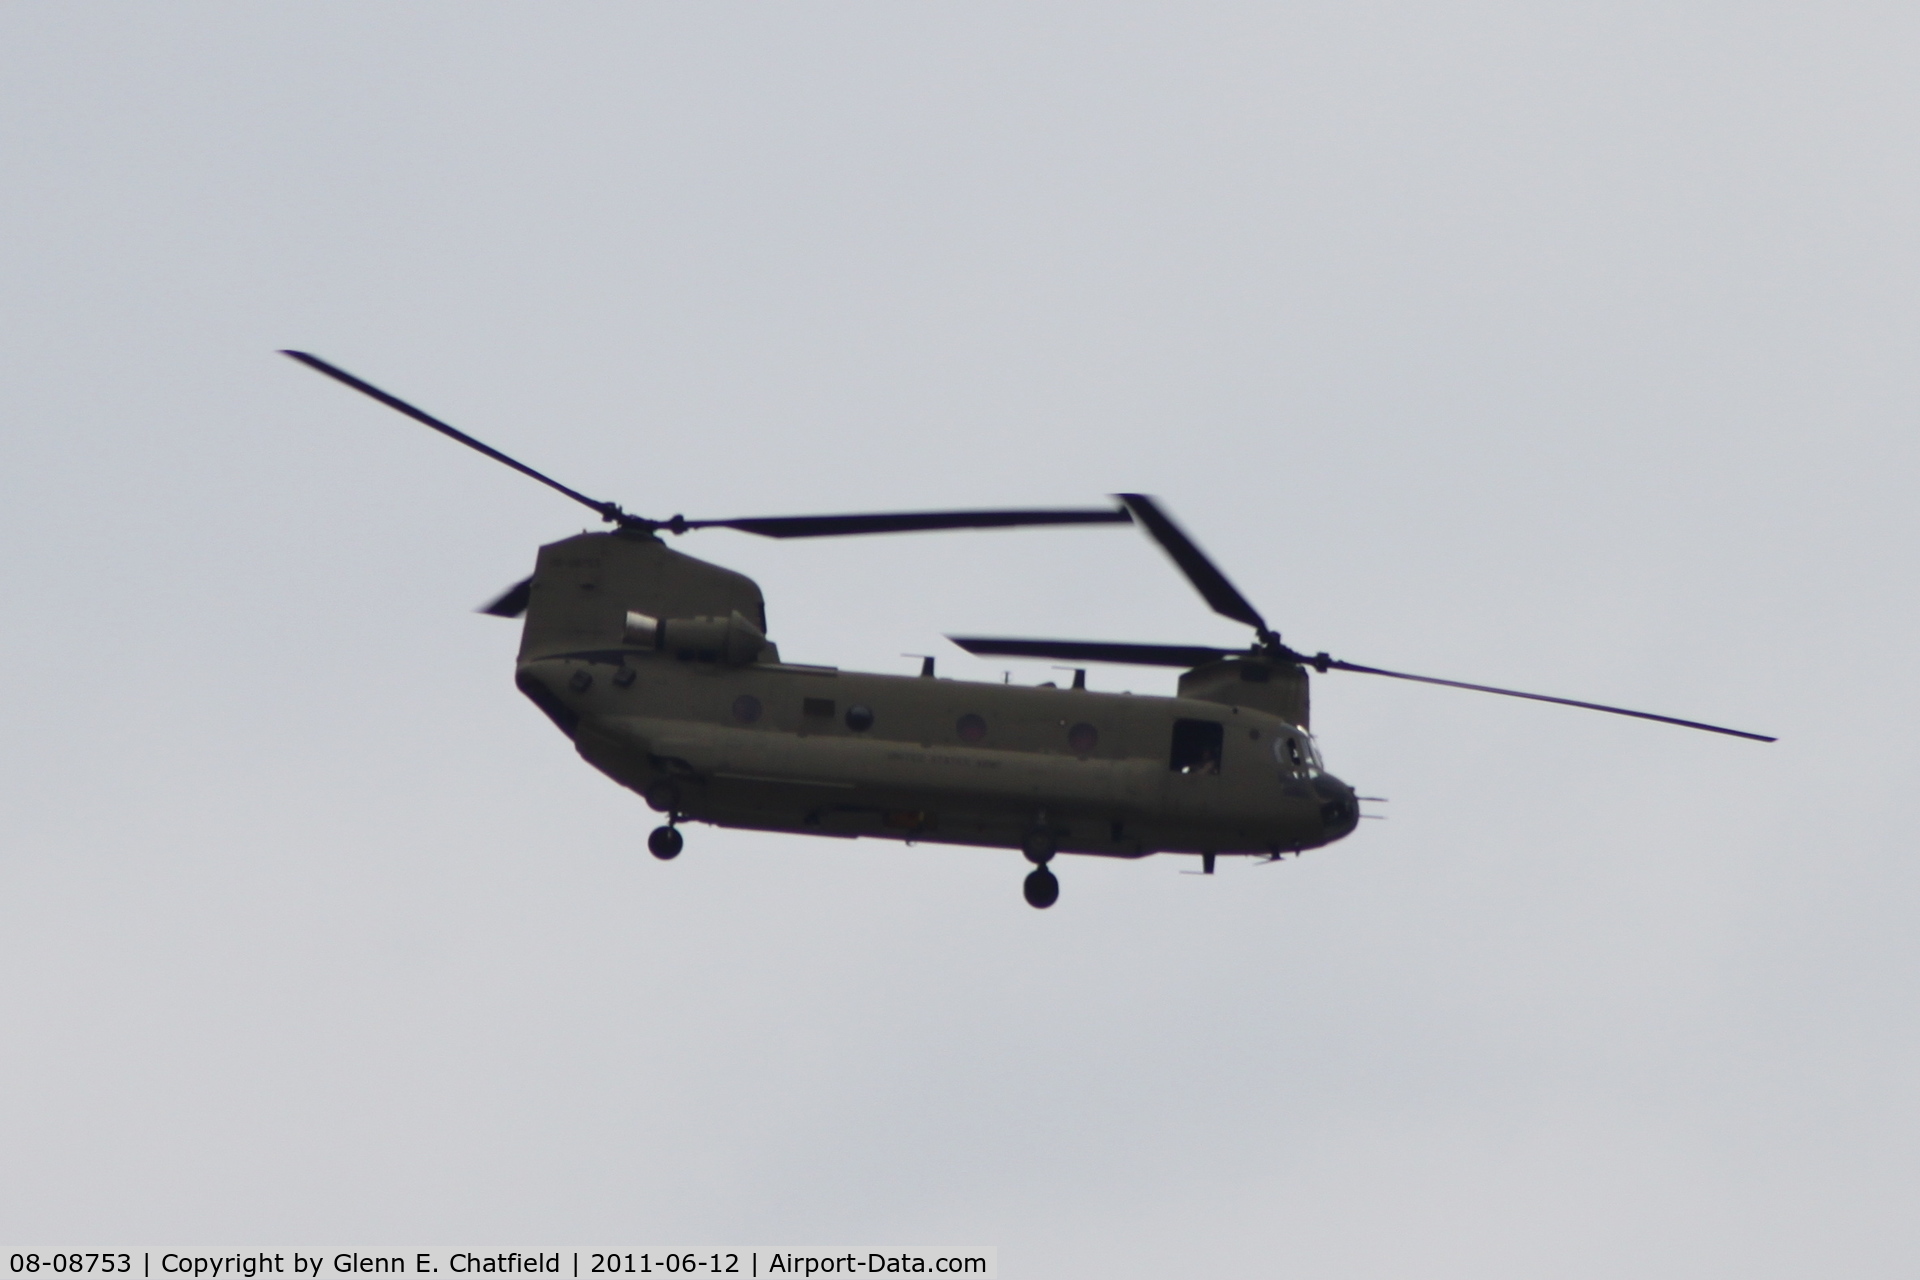 08-08753, 2011 Boeing CH-47F Chinook C/N M8753, Flying northwest-bound over North Liberty, IA on the way to Cedar Rapids Airport